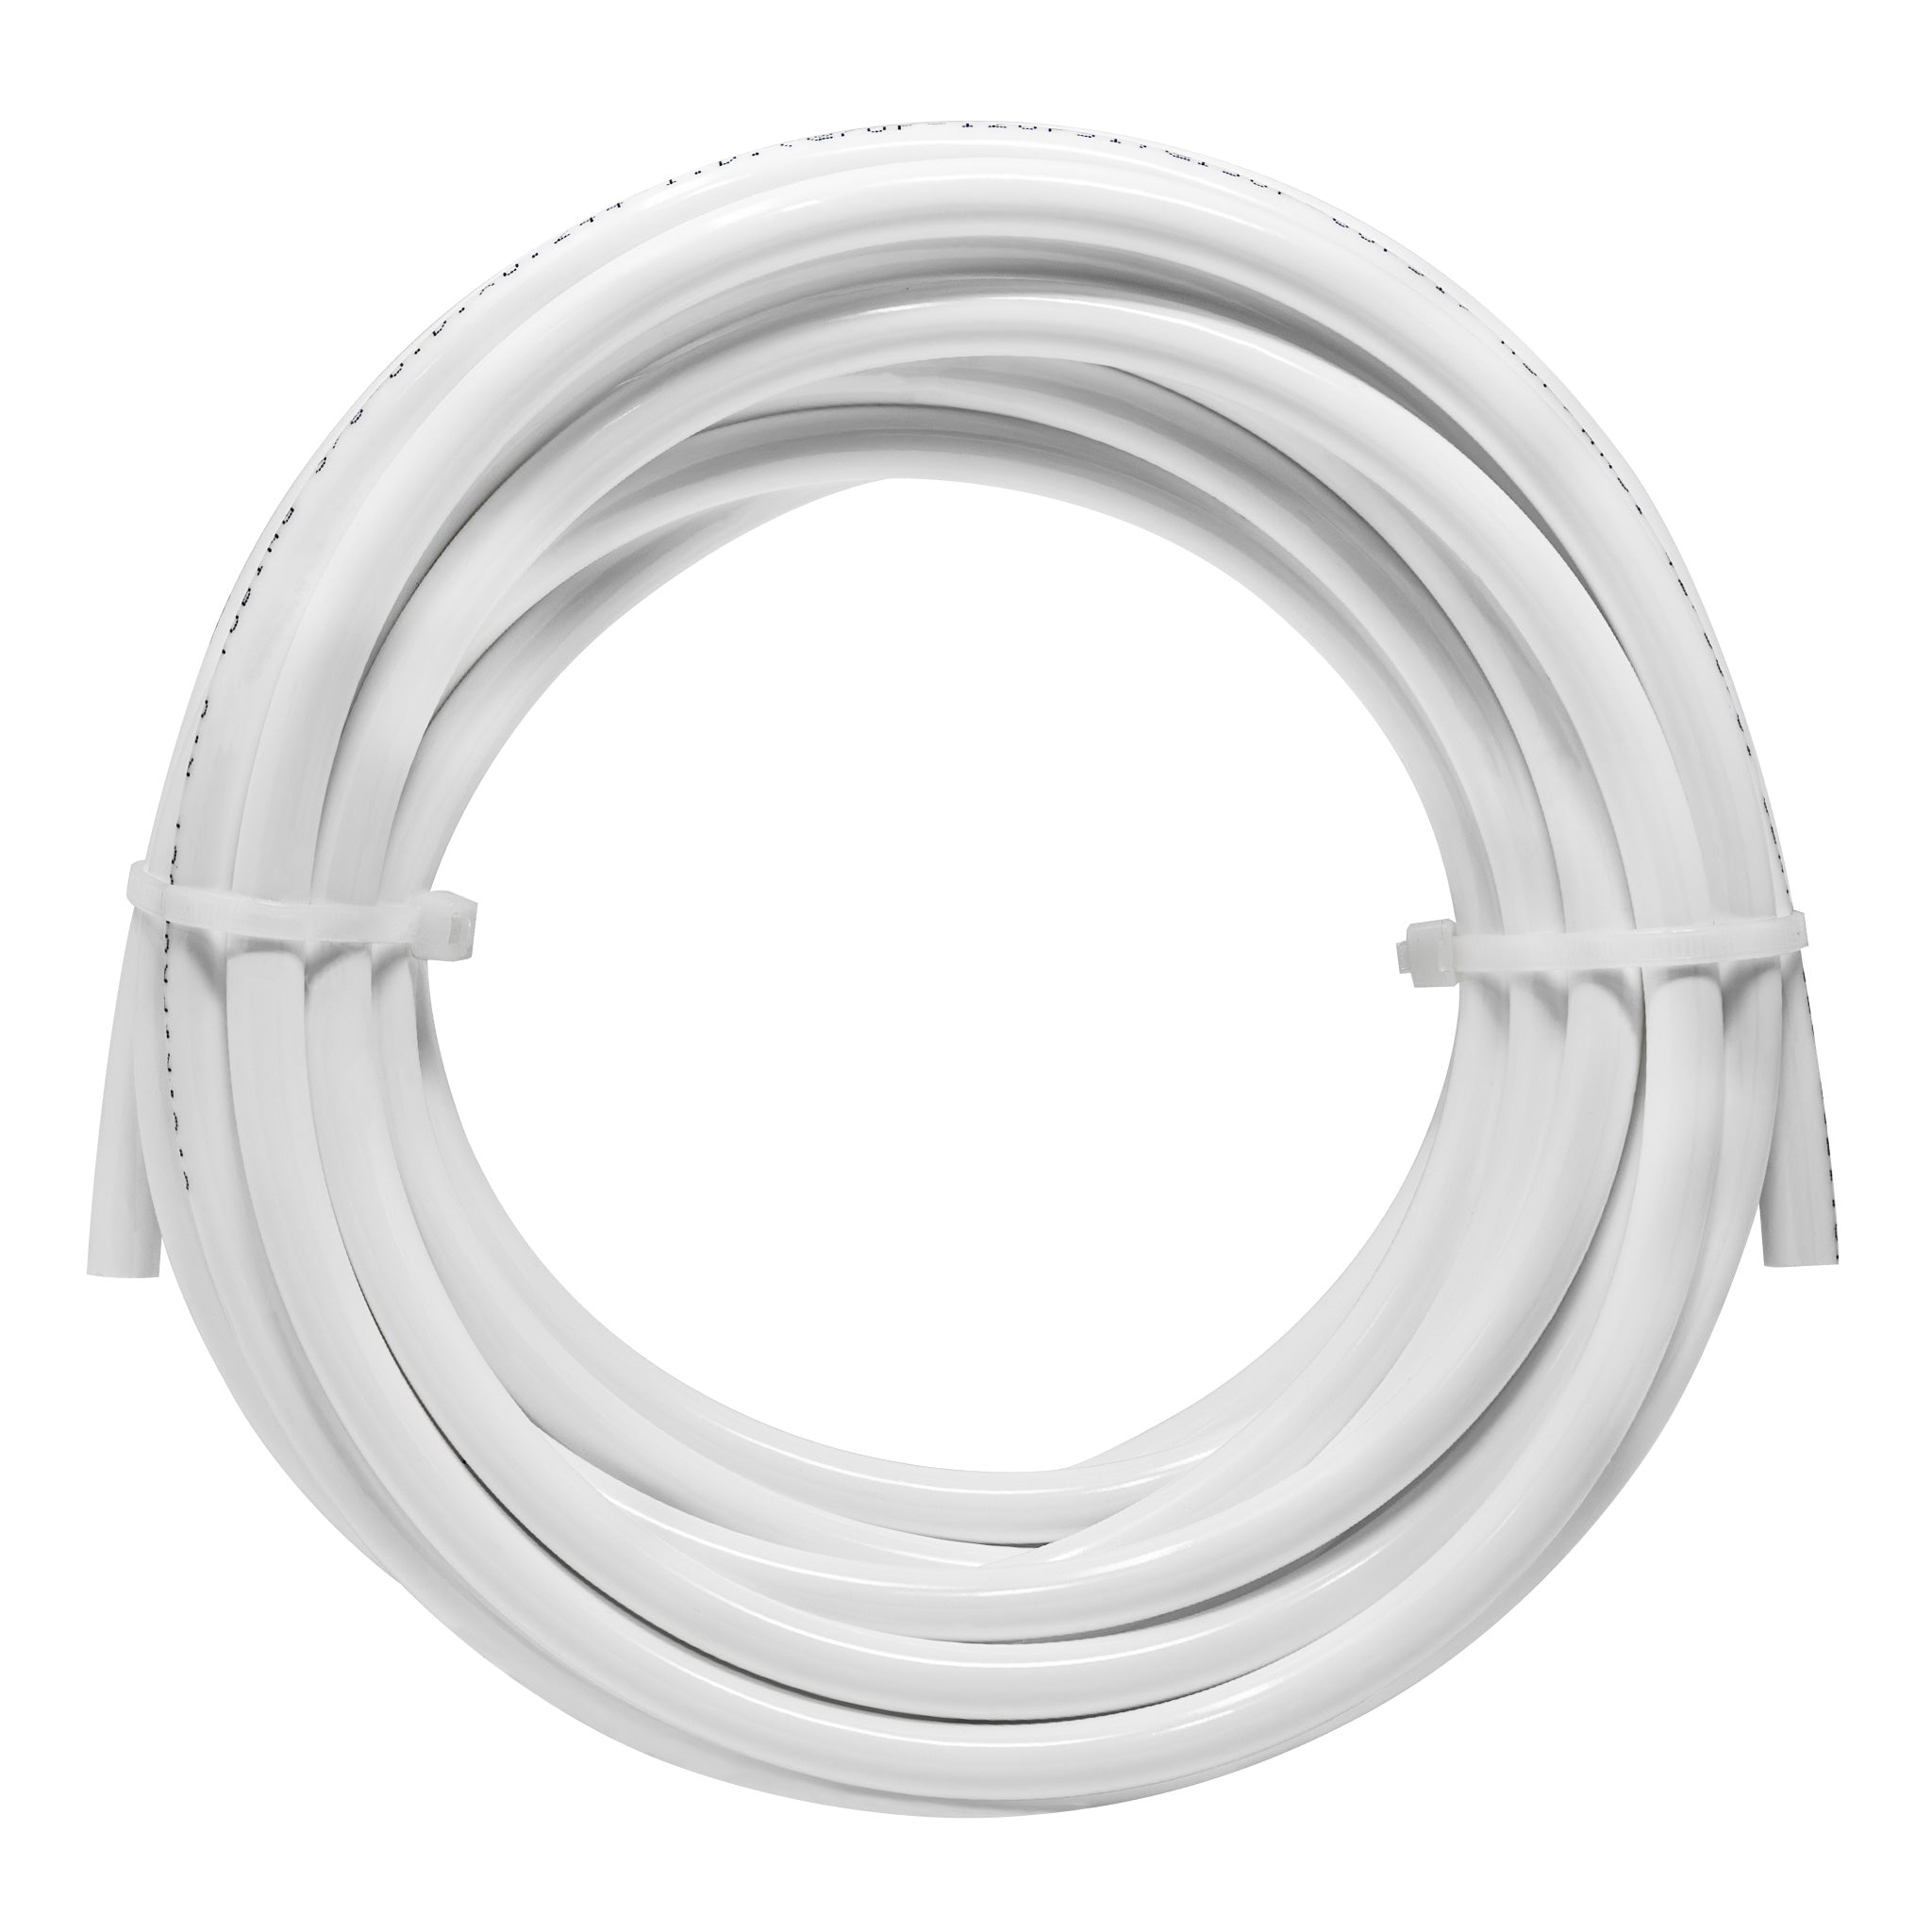 LLDPE 3/8" Tube 25 ft Roll in Metpure Retail Bag. Certified by NSF. For Reverse Osmosis De-ionized Water Filtration Systems, Refrigerators, and Other Appliances. White Color